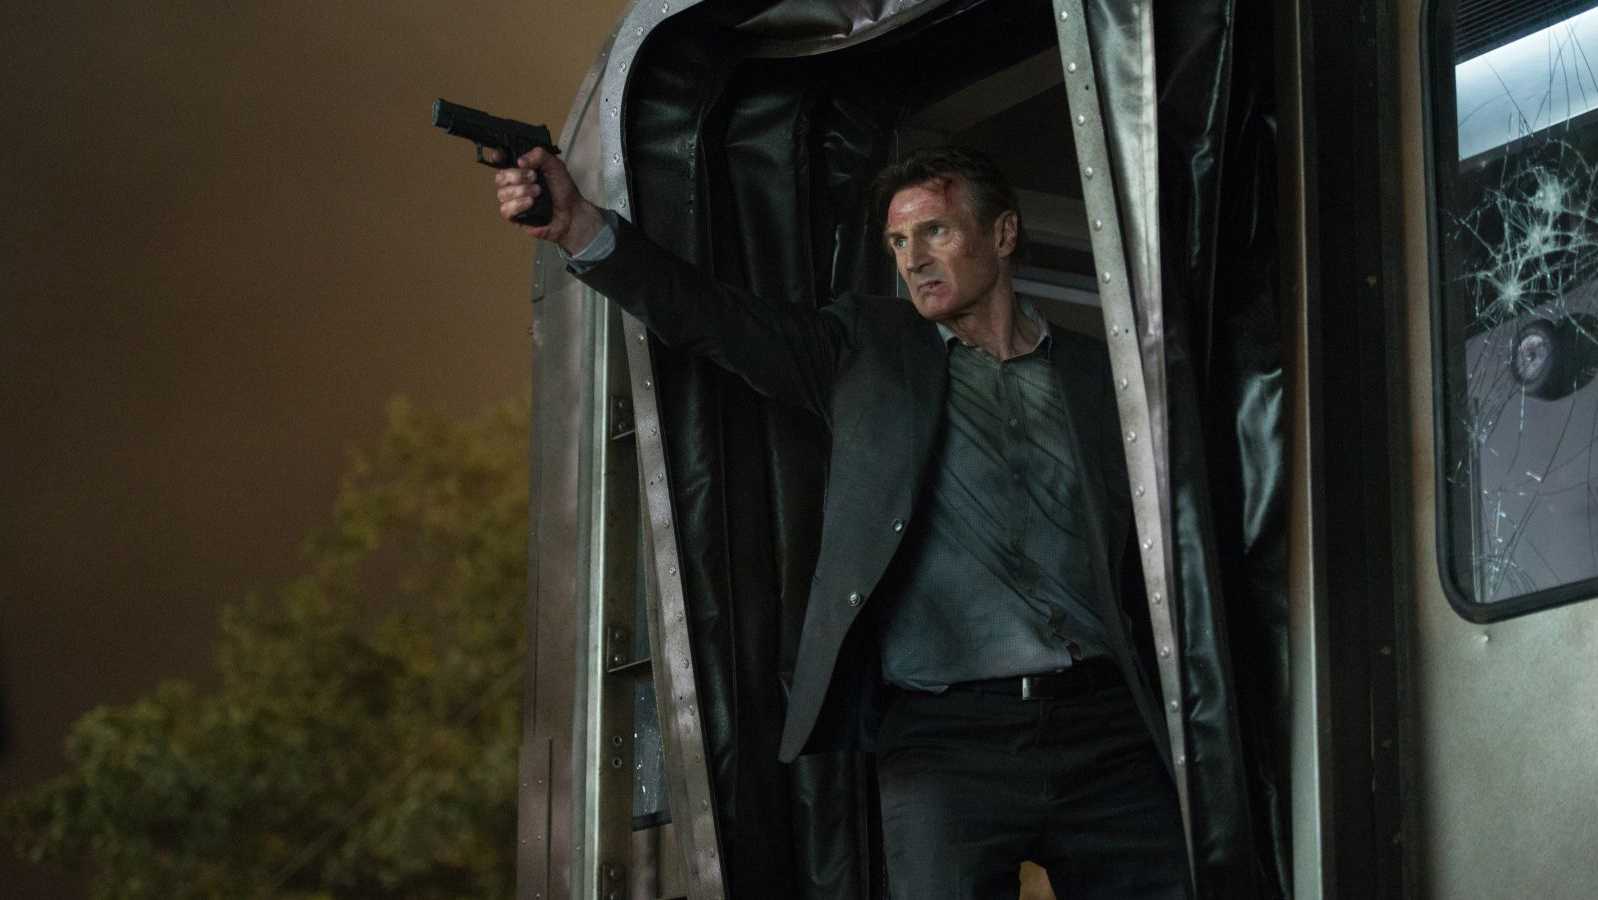 Review: ‘The Commuter’ derails before it leaves the station